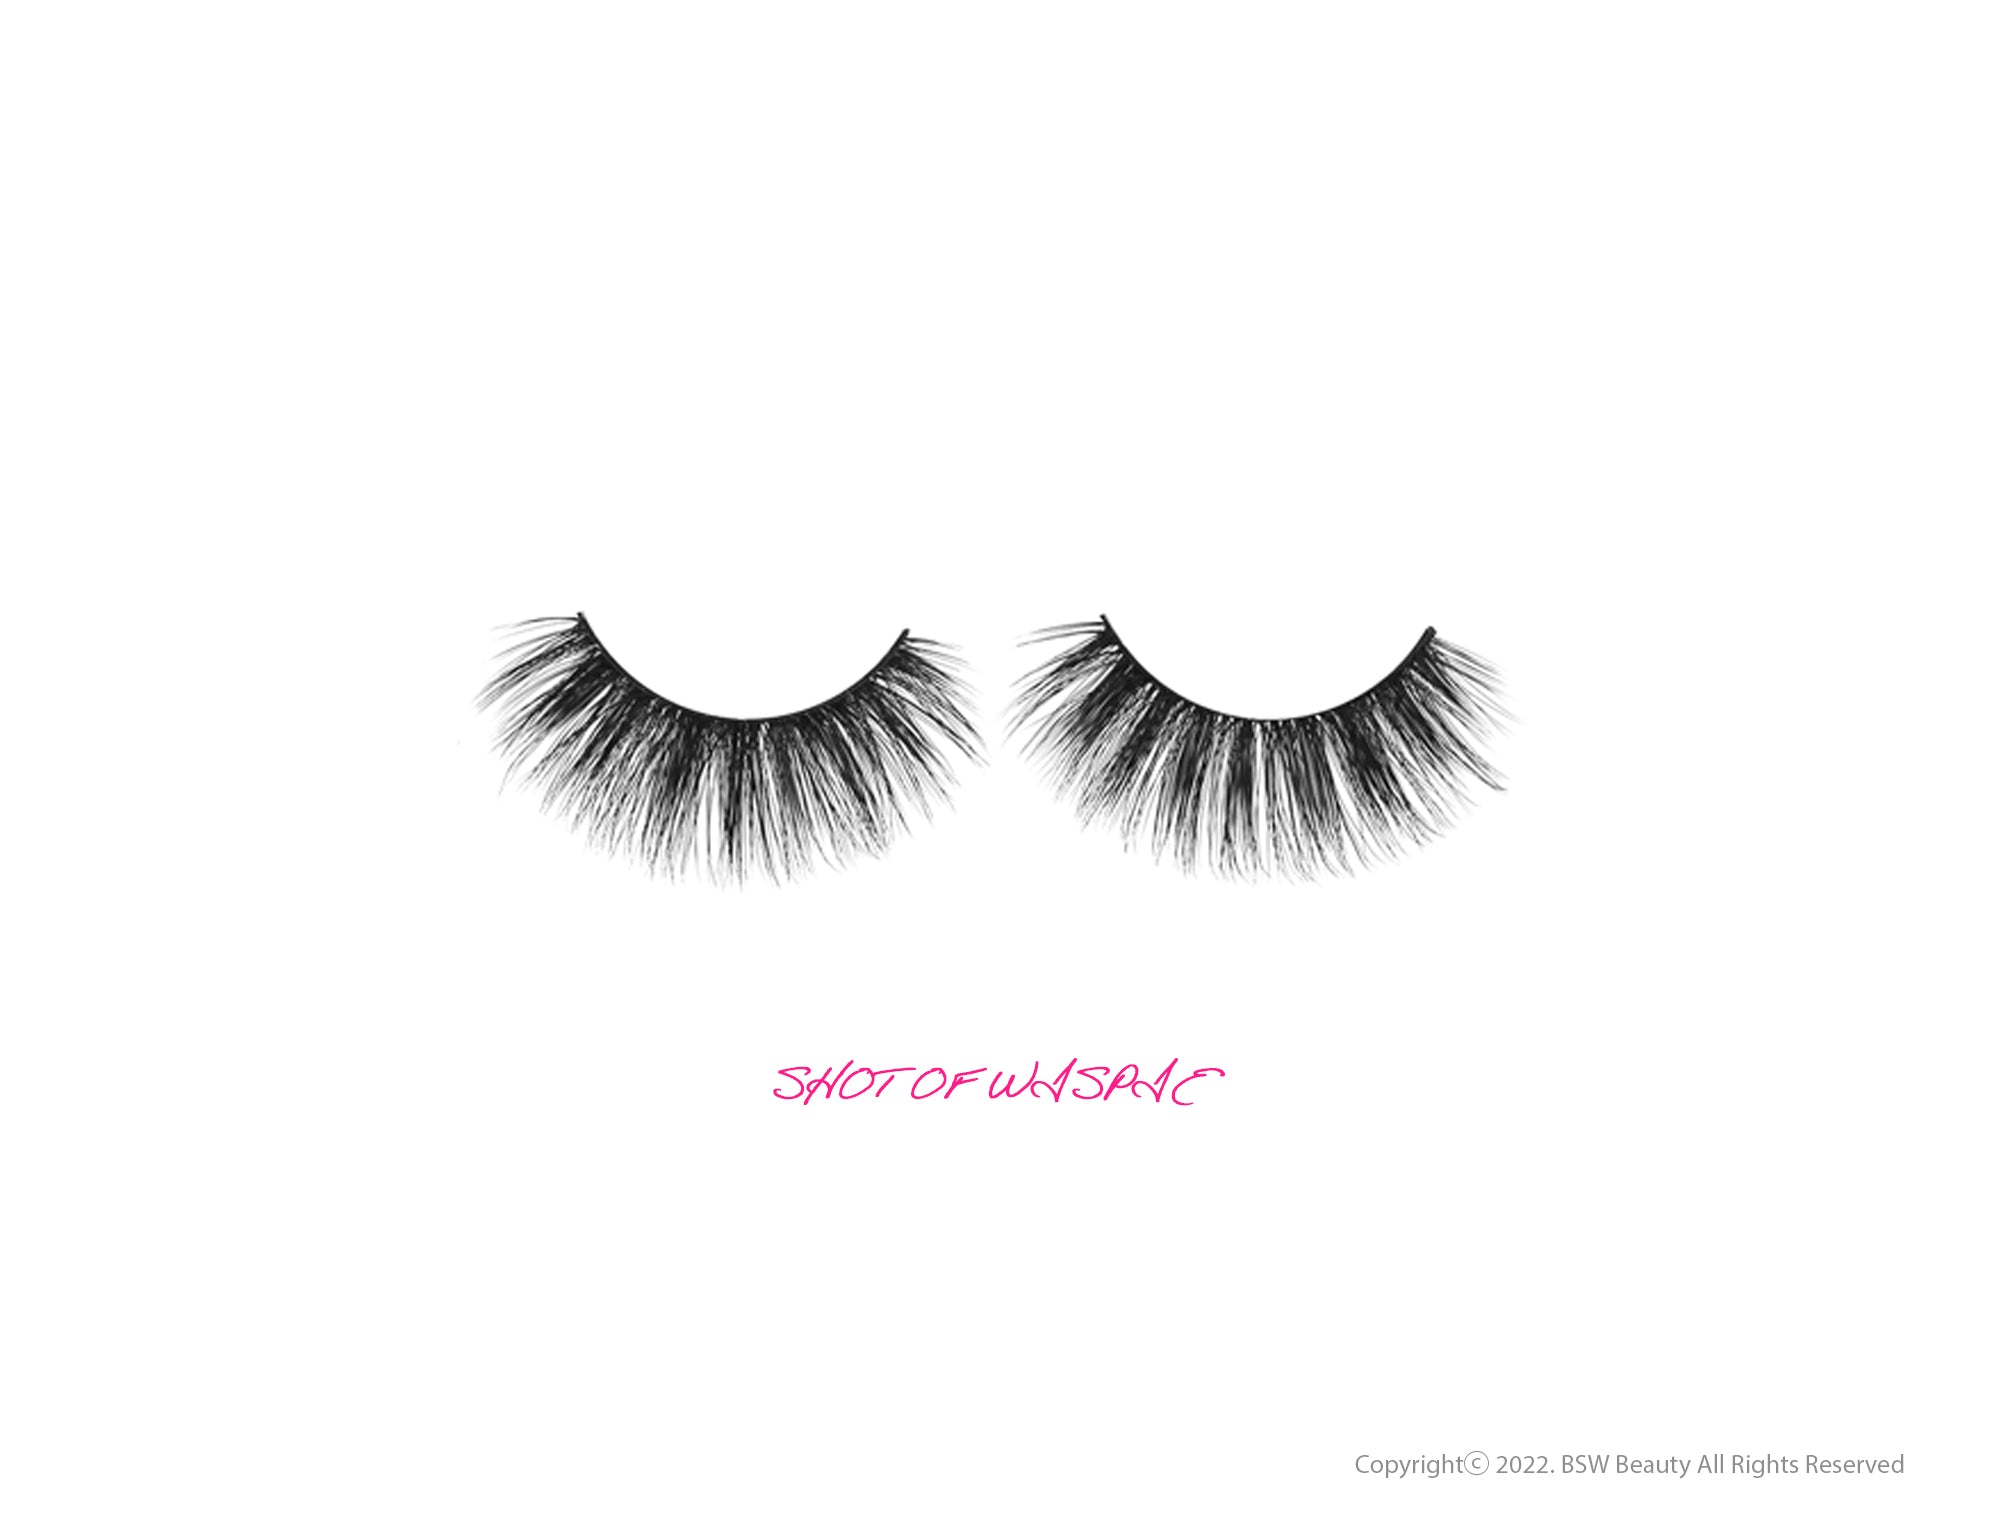 RD BEAUTY 3D SILK LASH COLLECTION - SHOT OF WISPIE